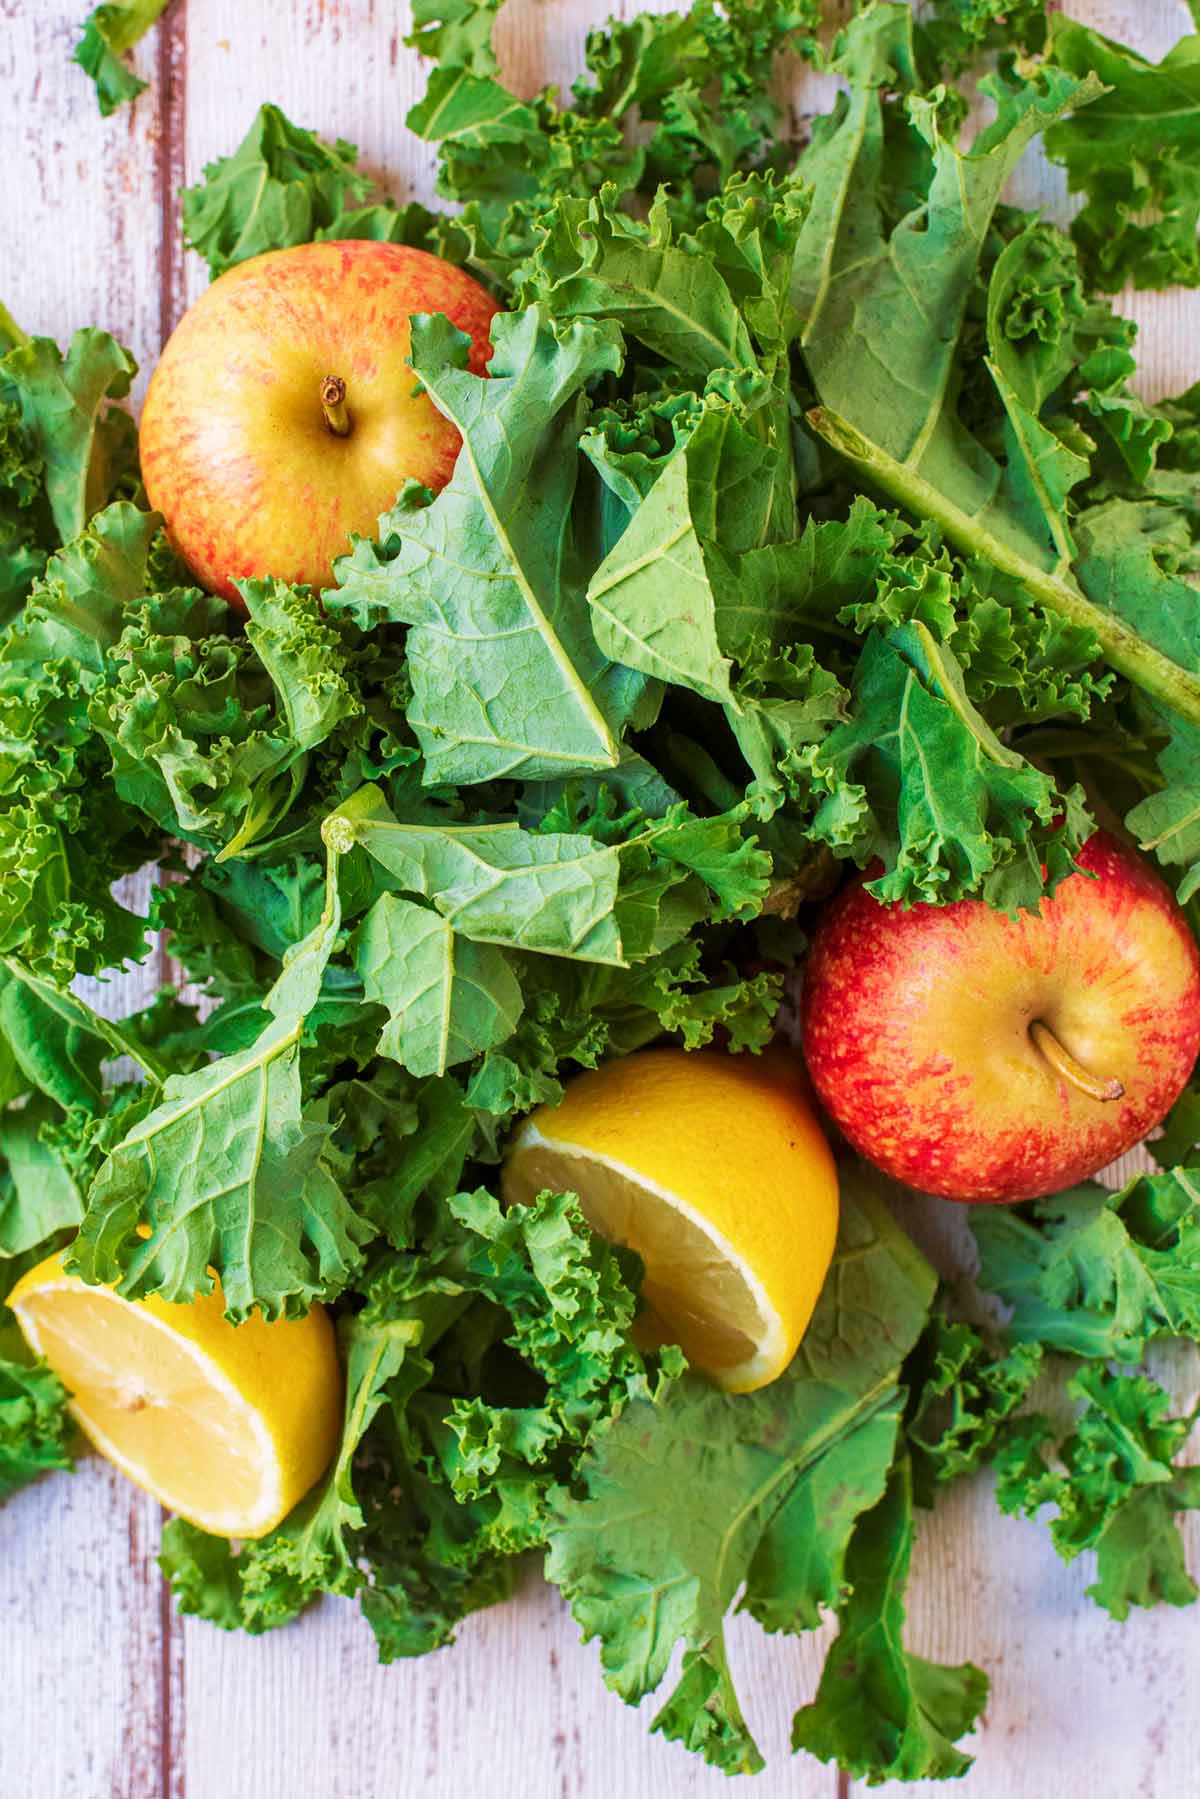 A large pile of raw kale leaves, two apples and two lemon halves all on a wooden surface